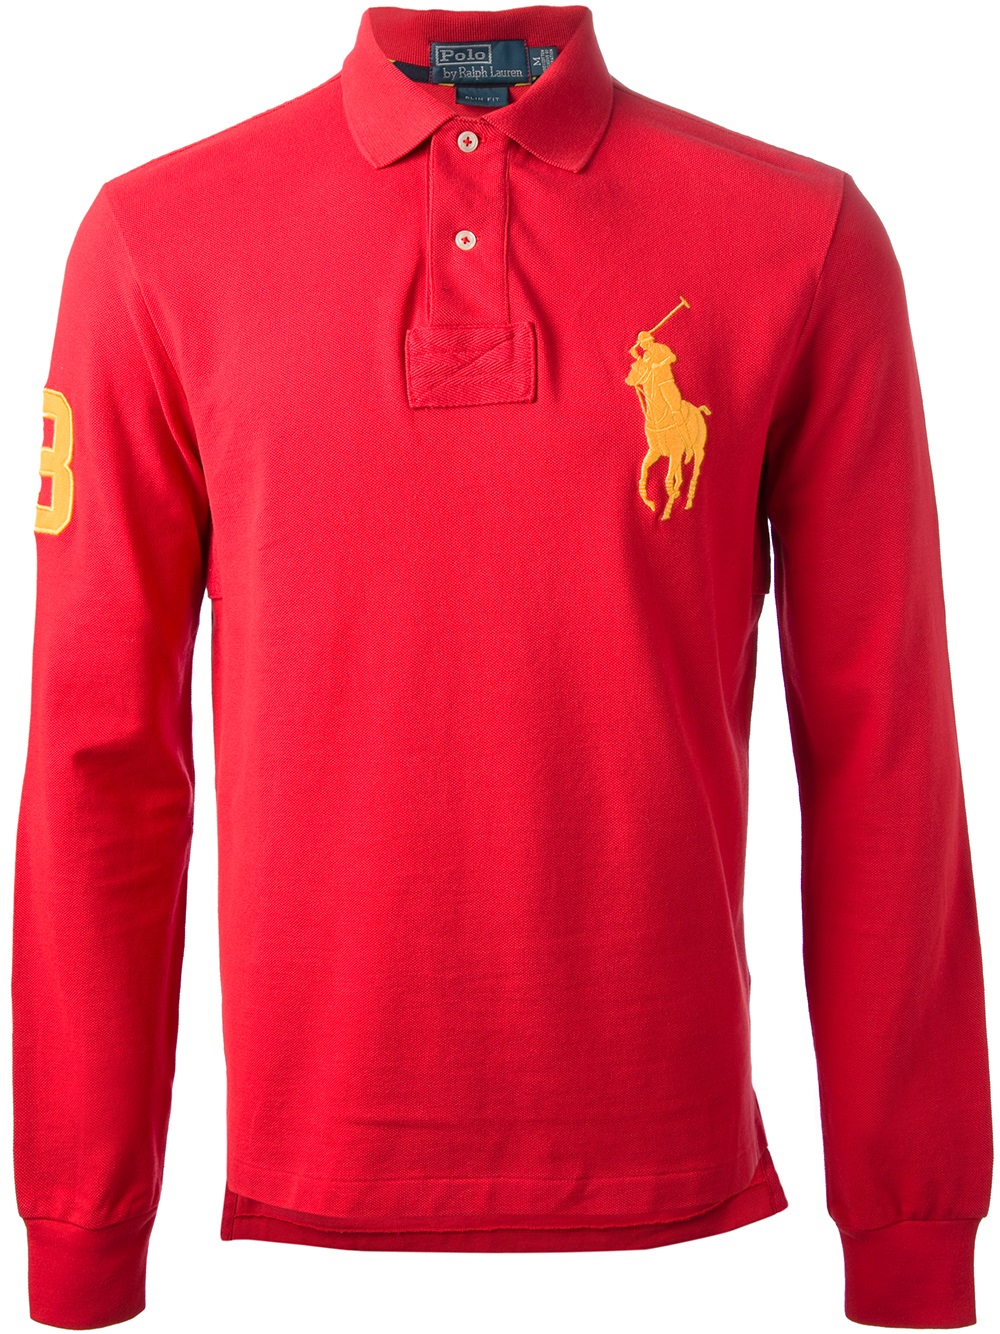 Lyst - Ralph Lauren Blue Label Big Pony Polo Shirt in Red for Men